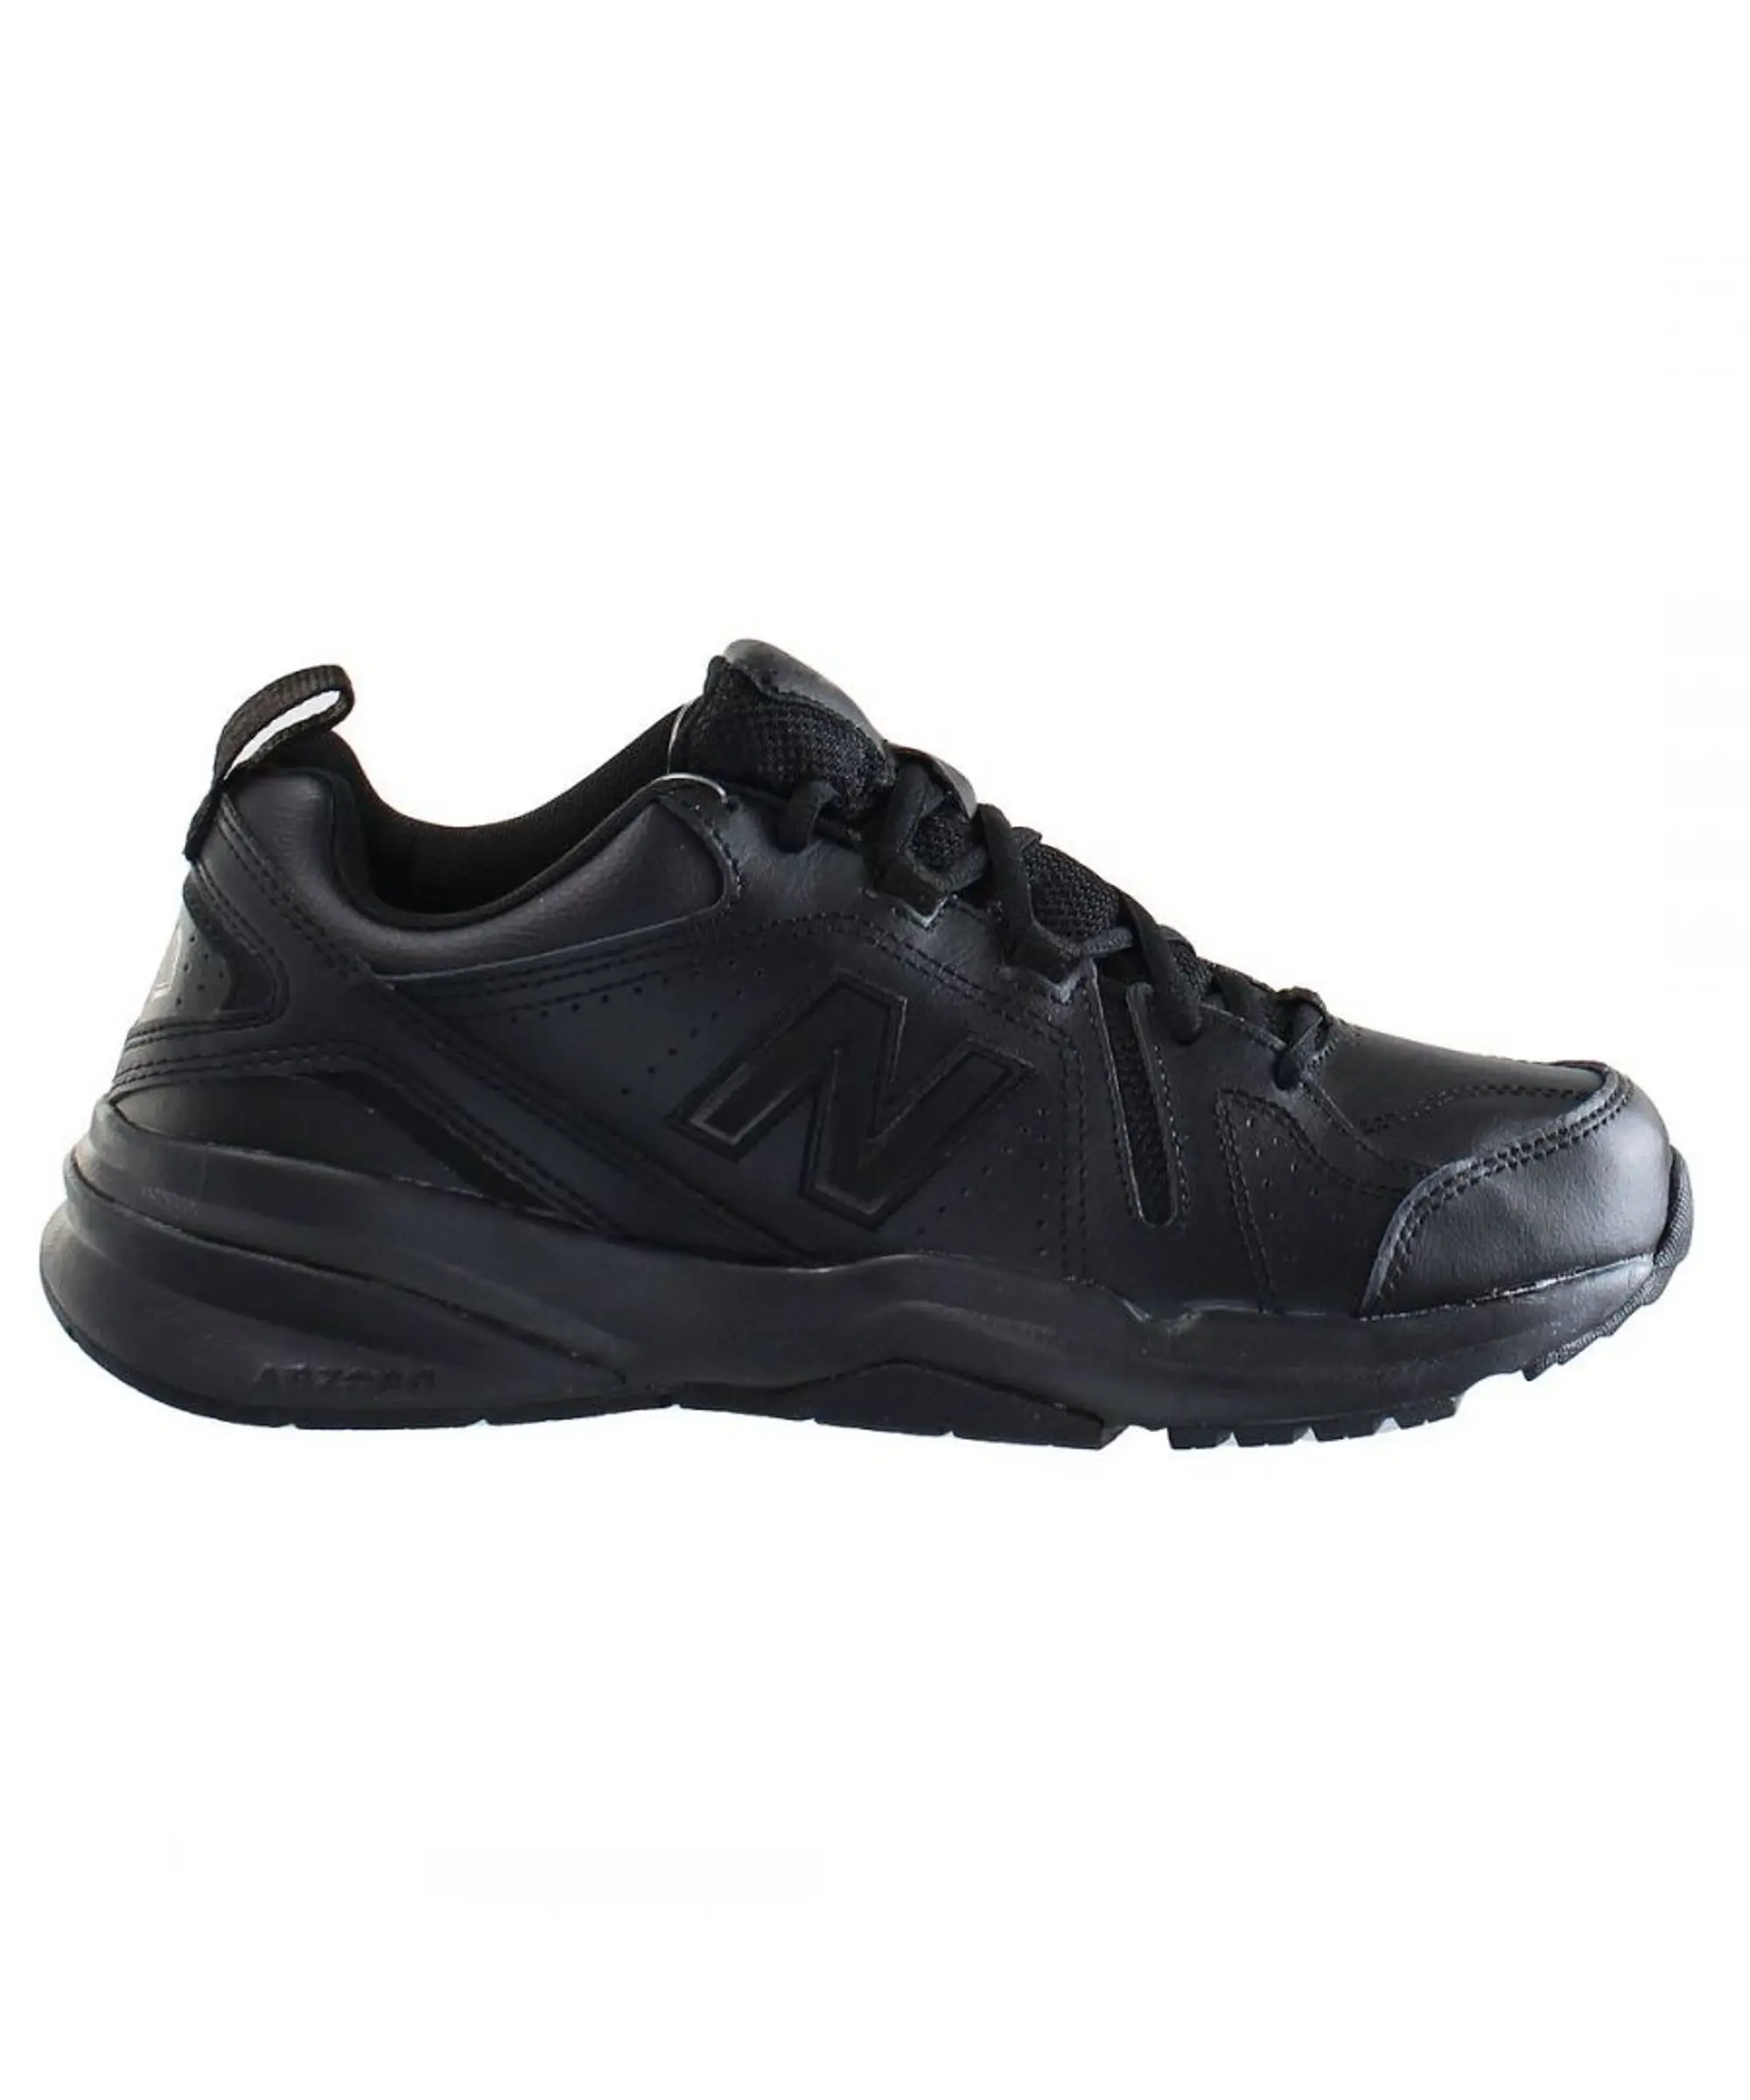 New Balance MX608v5 SR Black Mens Trainers Leather (archived)